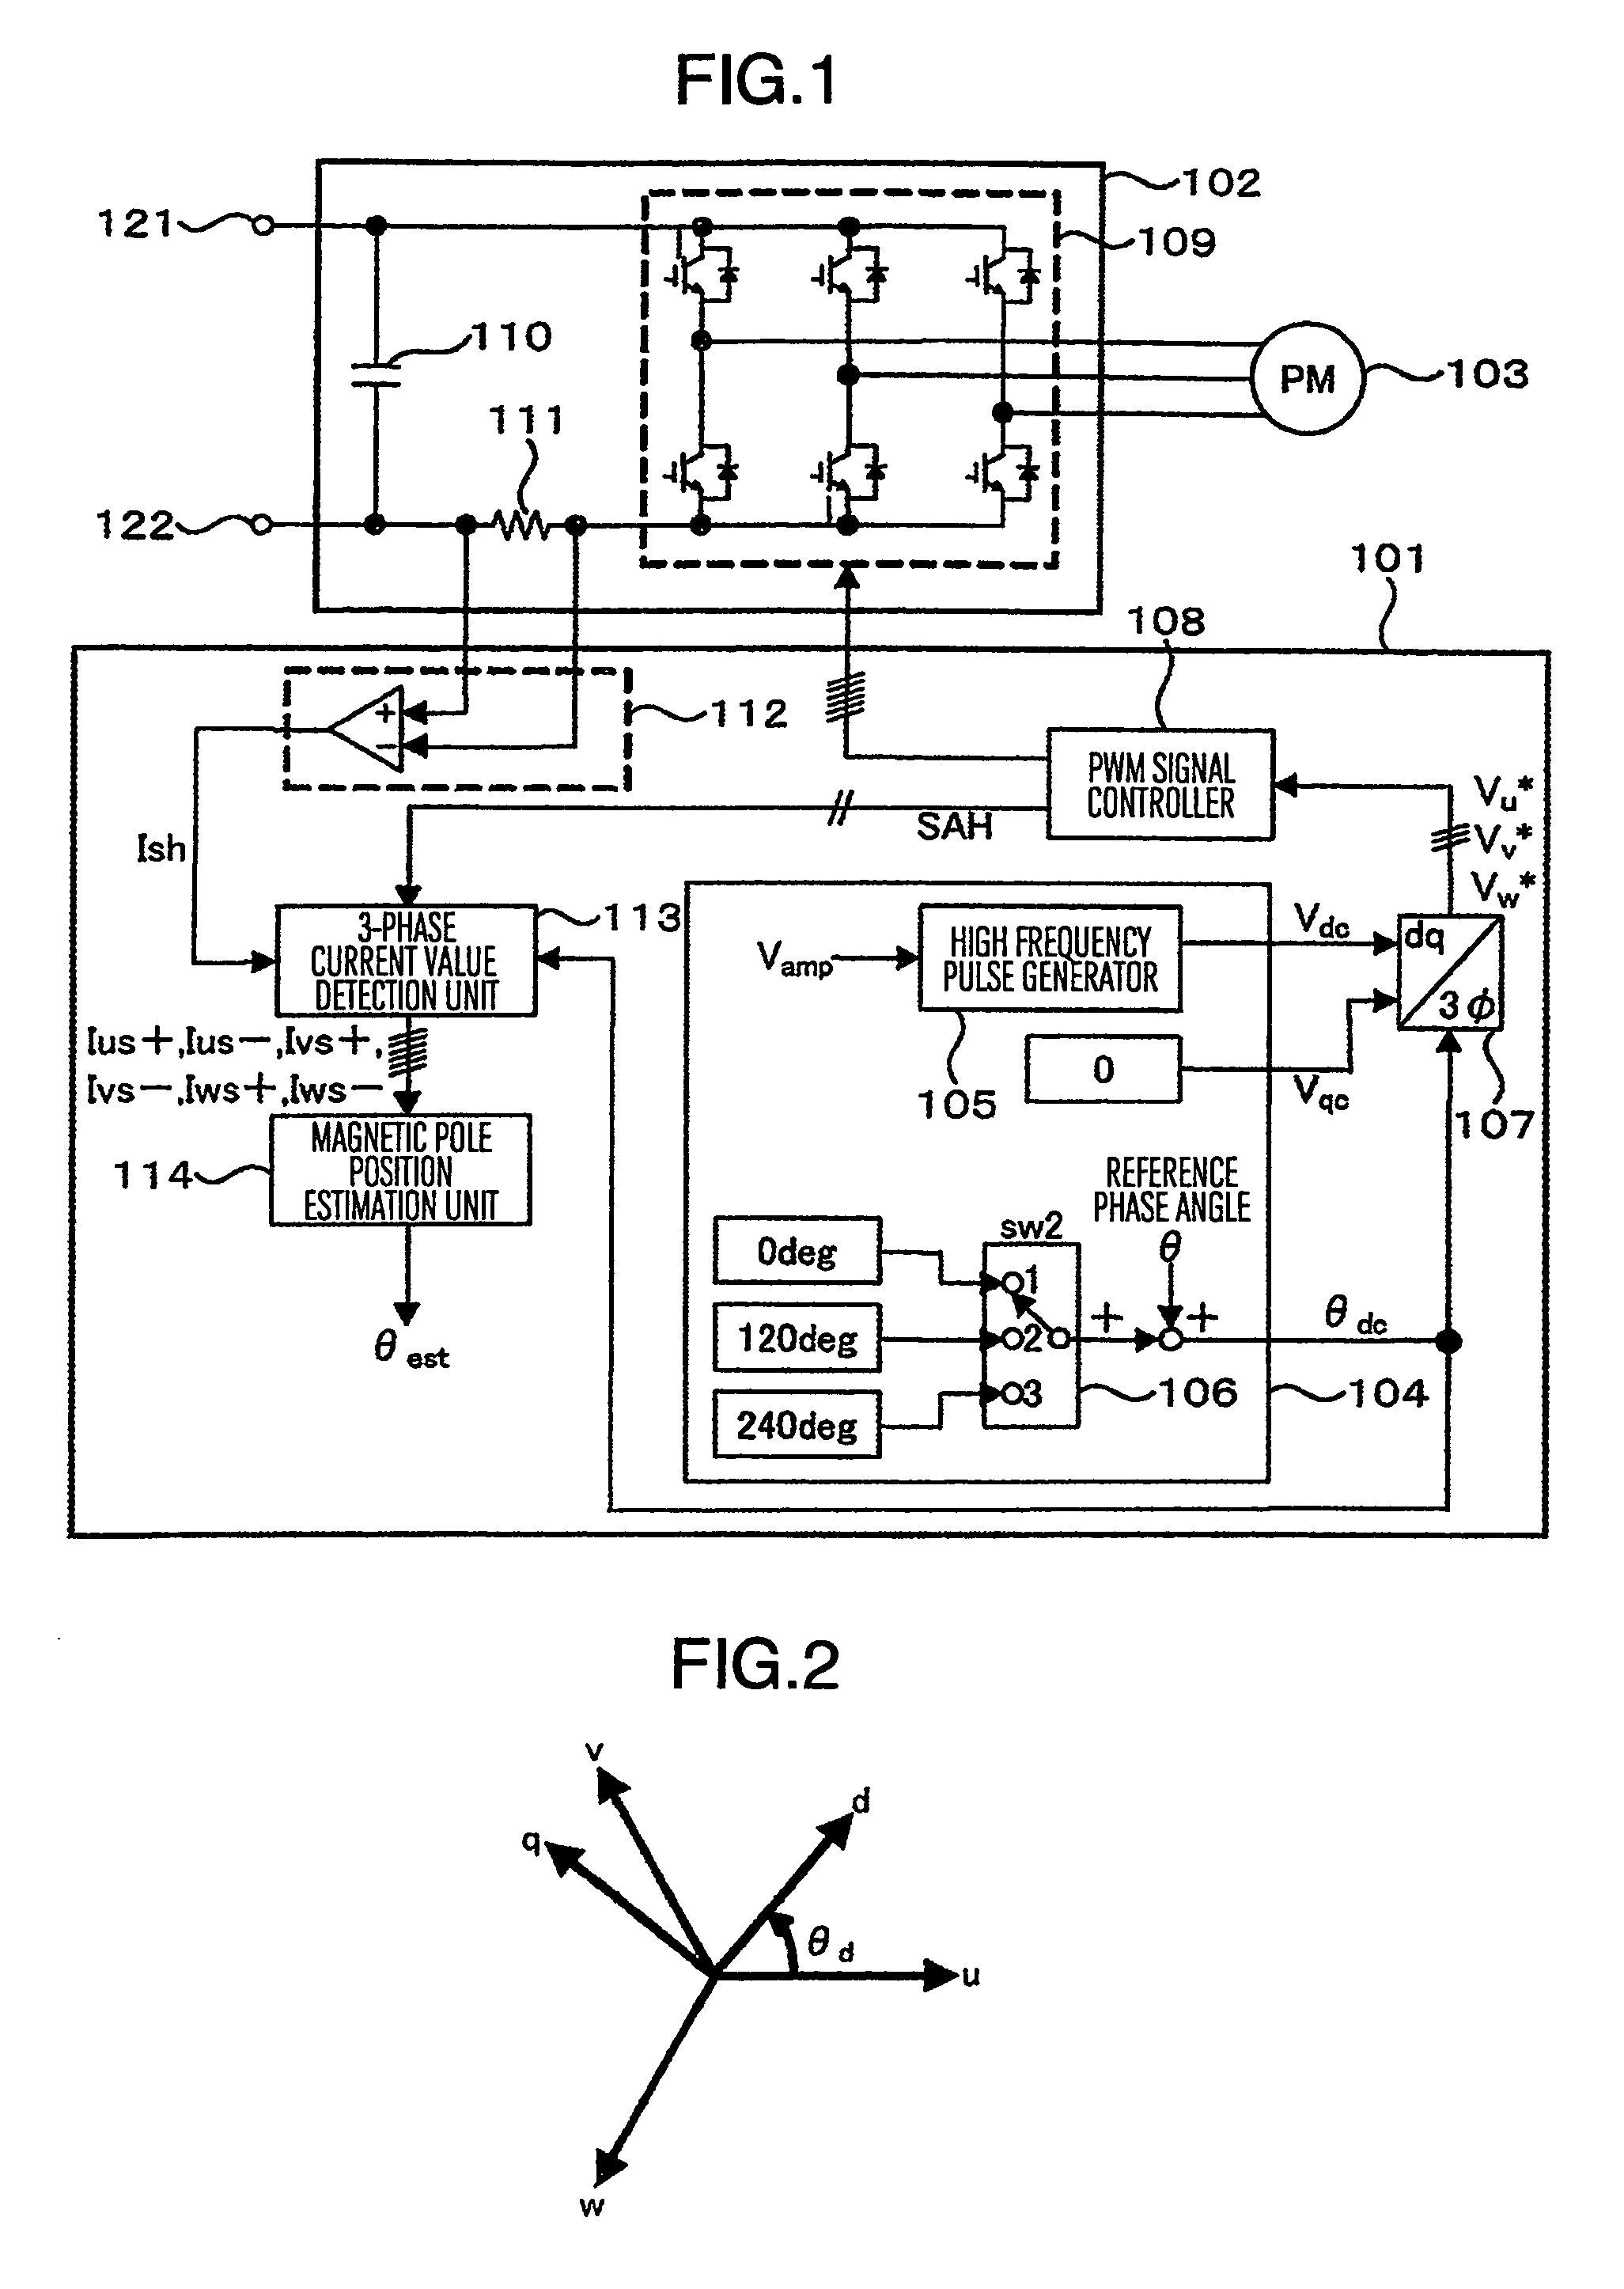 Driving system of permanent magnet synchronous motor